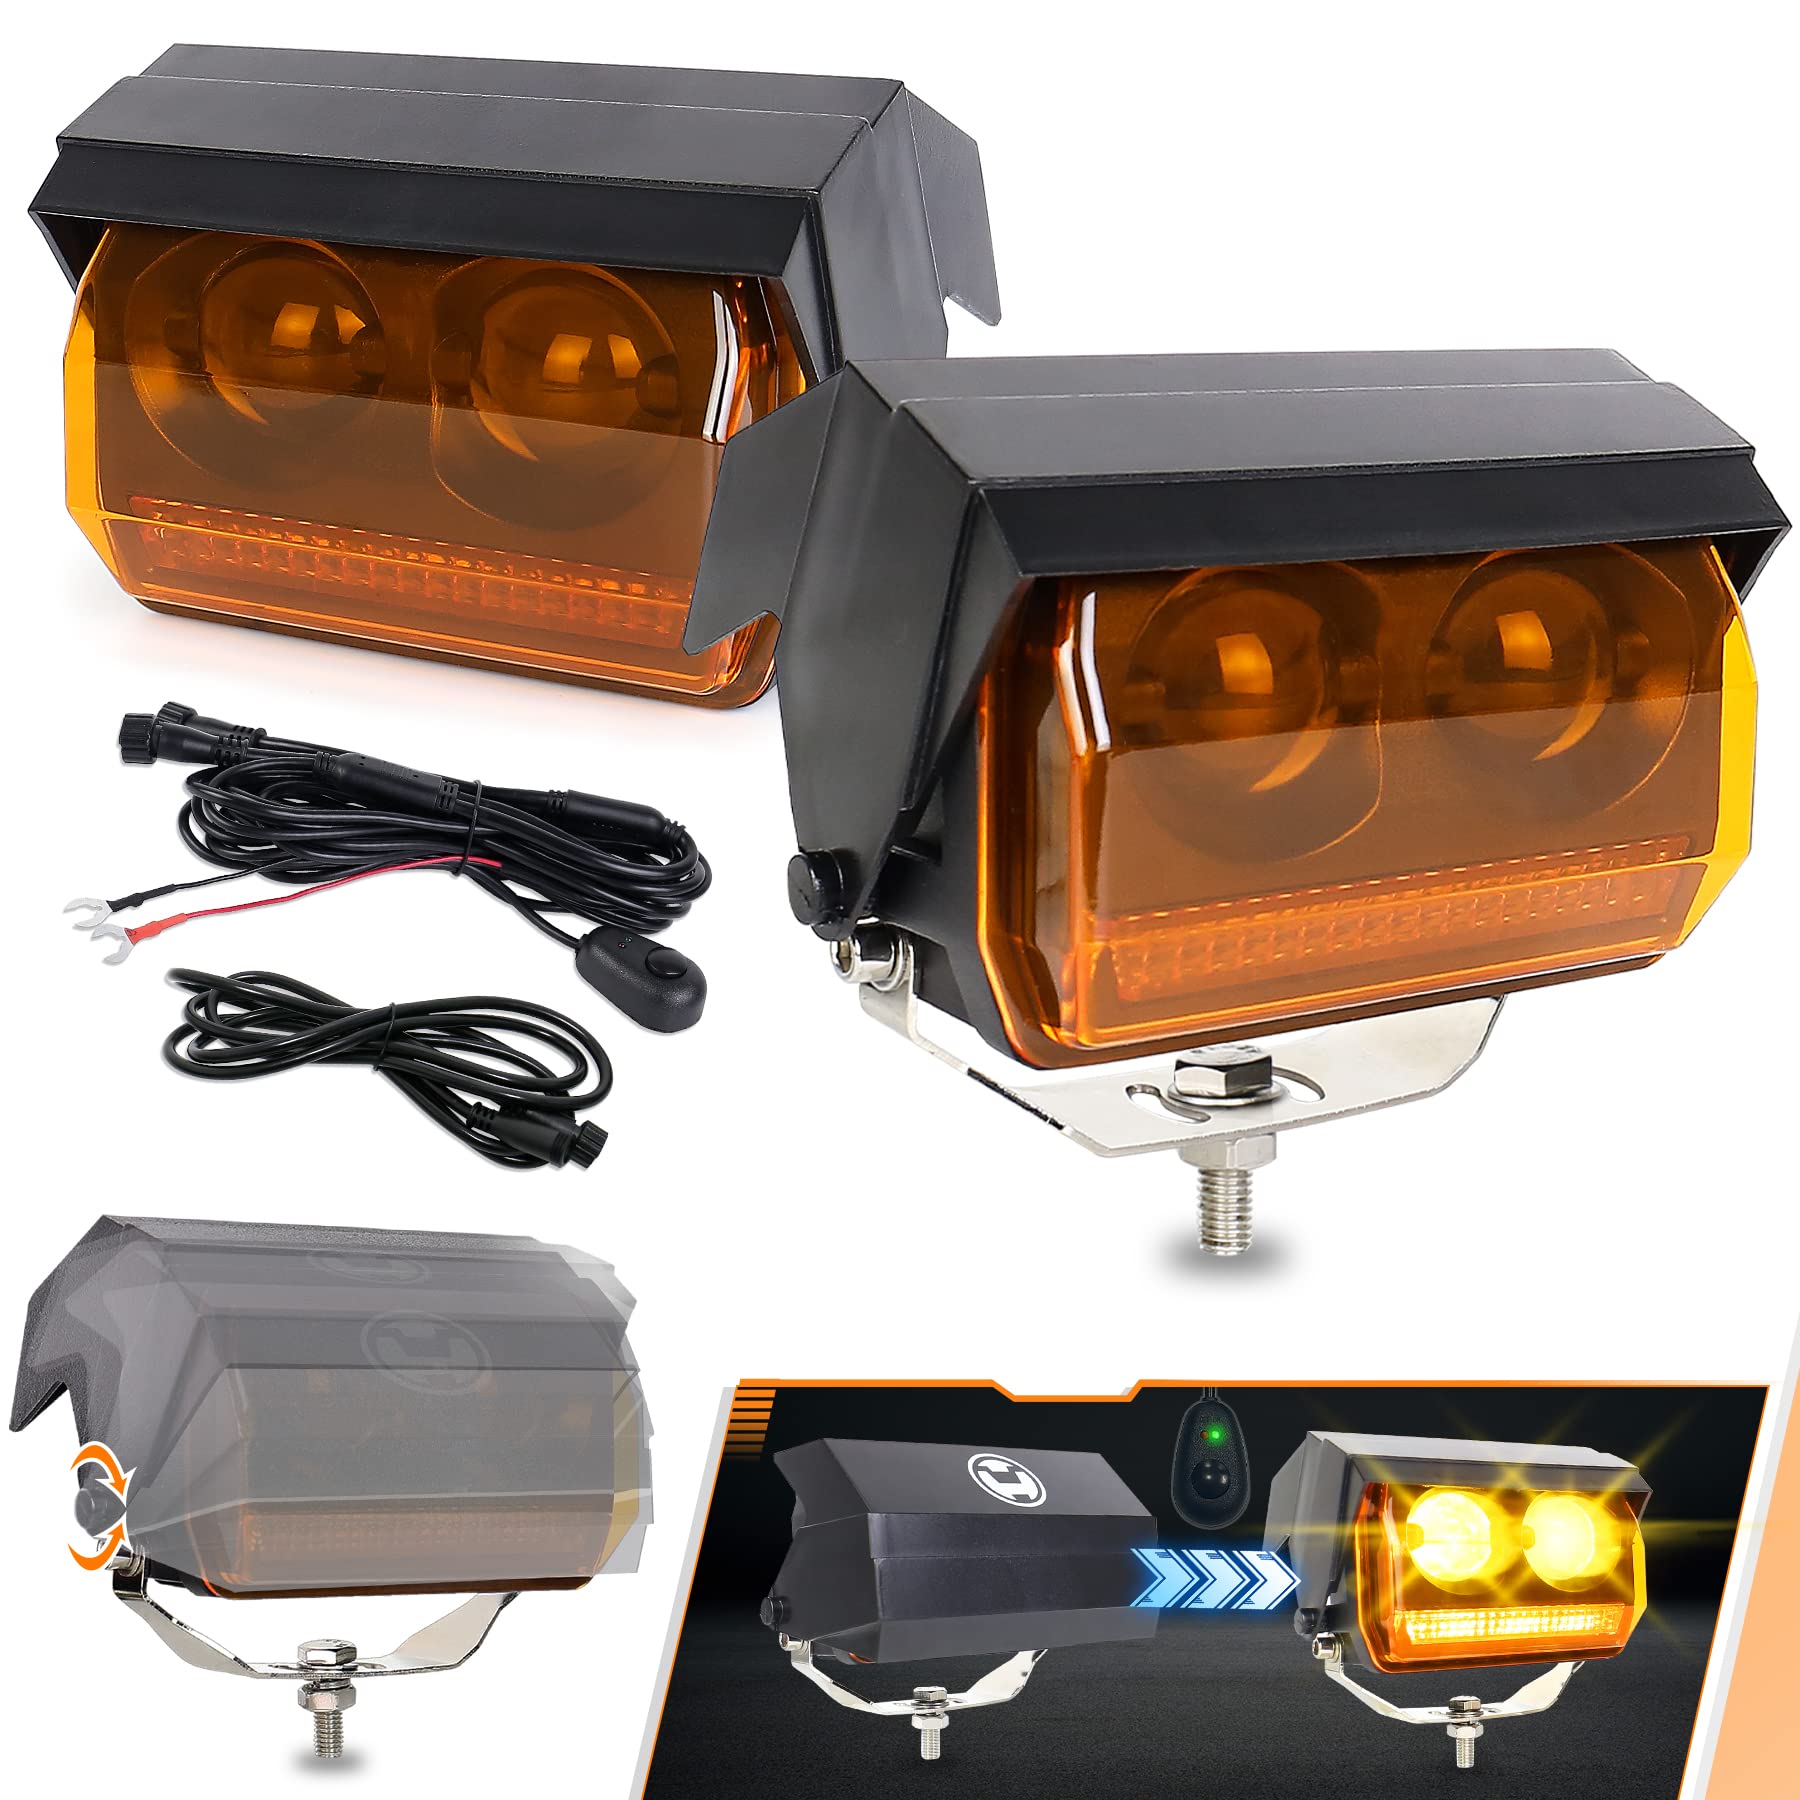 LED Off Road Lights, Amber Lens Hidden LED Driving Lights with Automatic ON/OFF Cover Switch Wiring Harness Kit Compatible with Trucks ATV UTV Toyota Pickup GMC 4x4 SUV